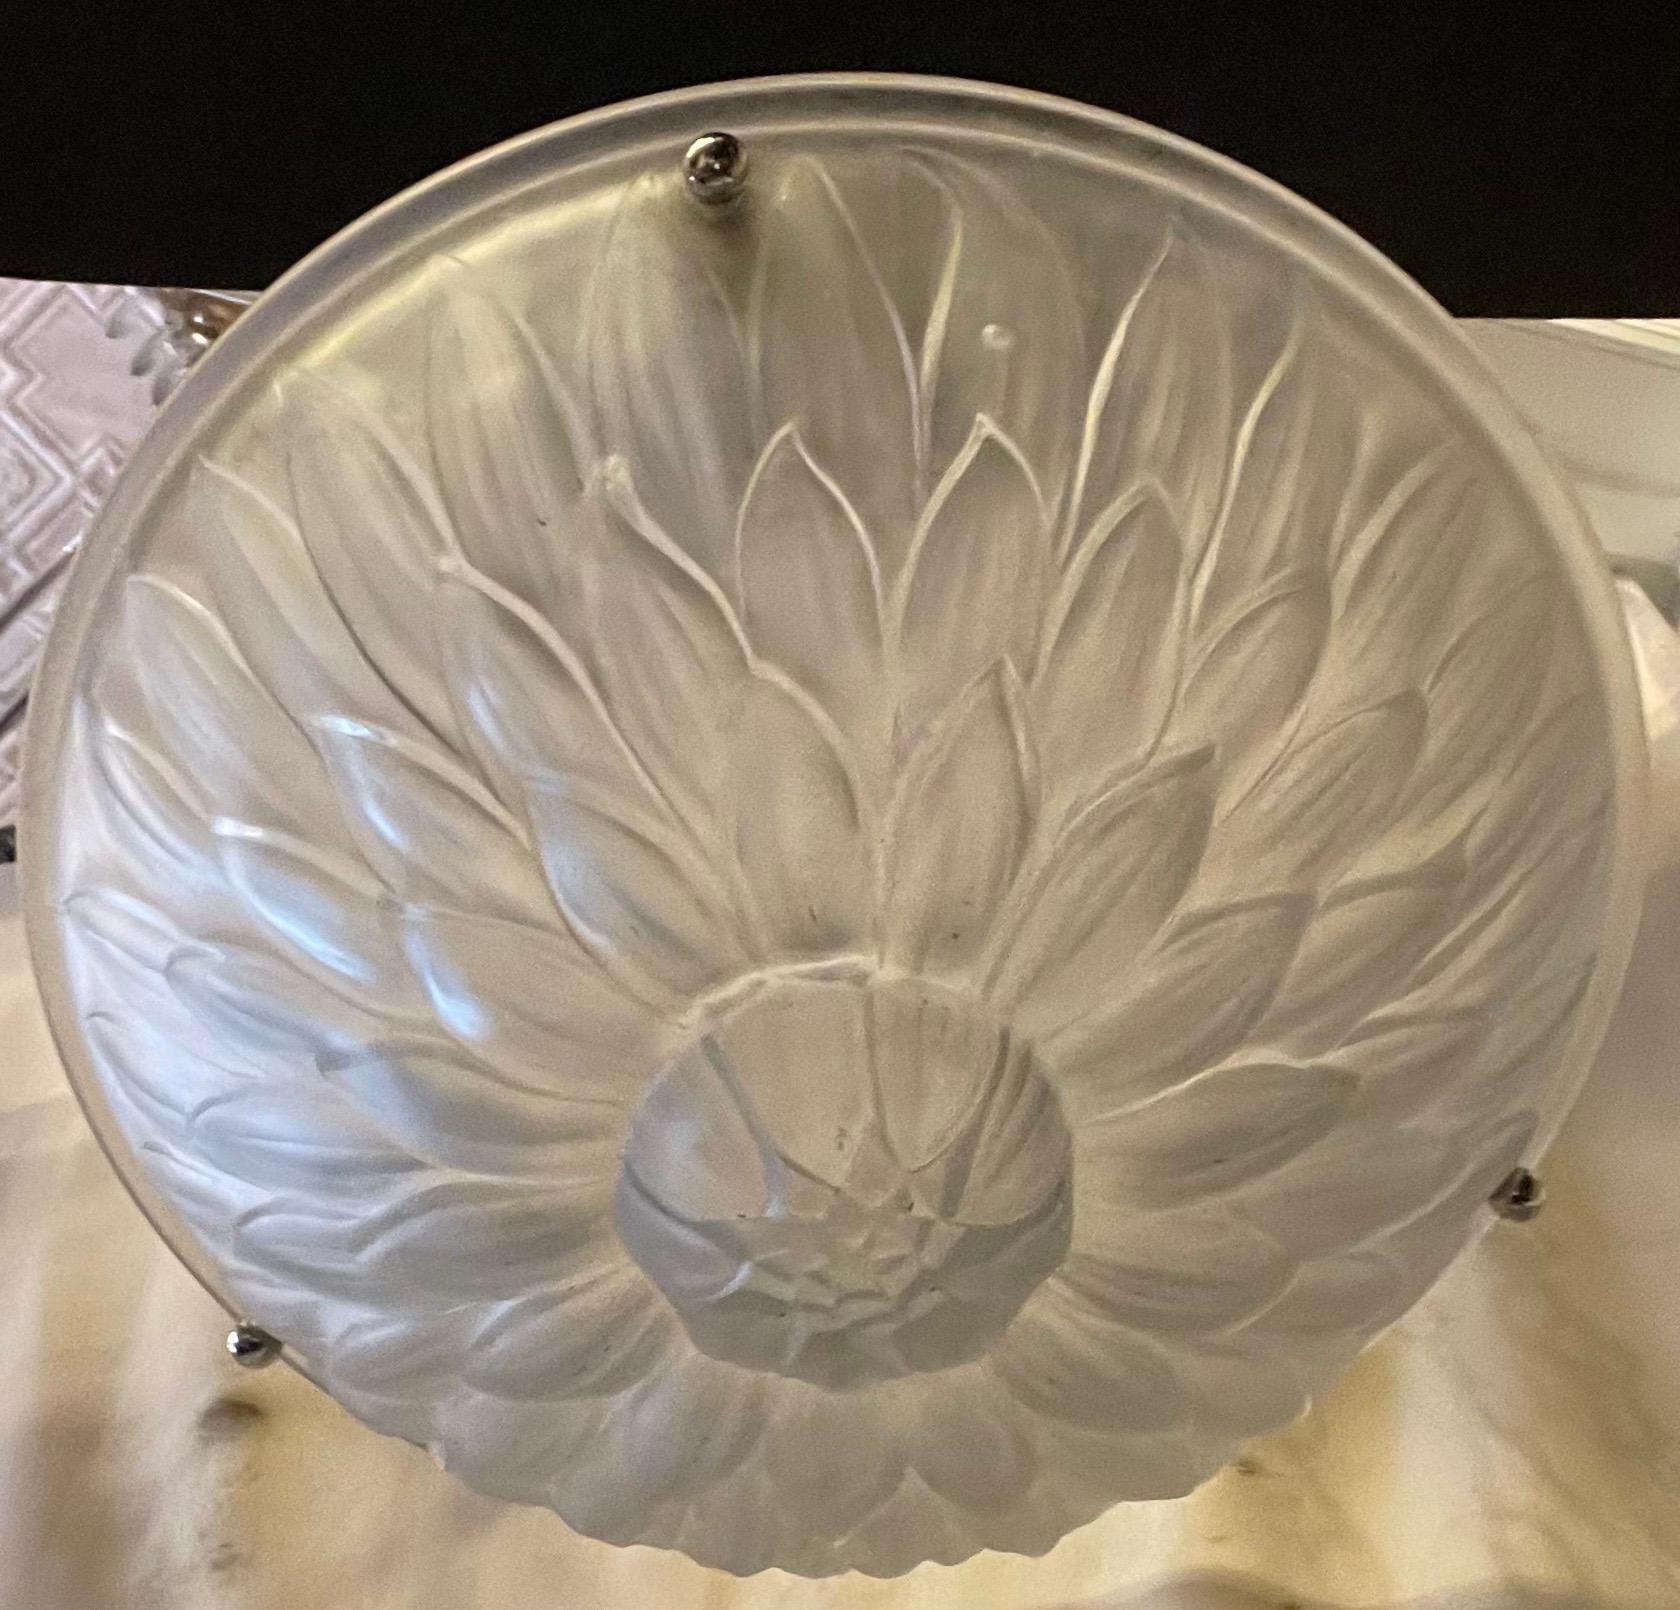 A Wonderful French mid century Art Deco sunflower pattern round frosted glass bowl with polished nickel canopy and chain, this light fixture has been rewired with 3 new candelabra sockets and the height is adjustable with the addition or removal of